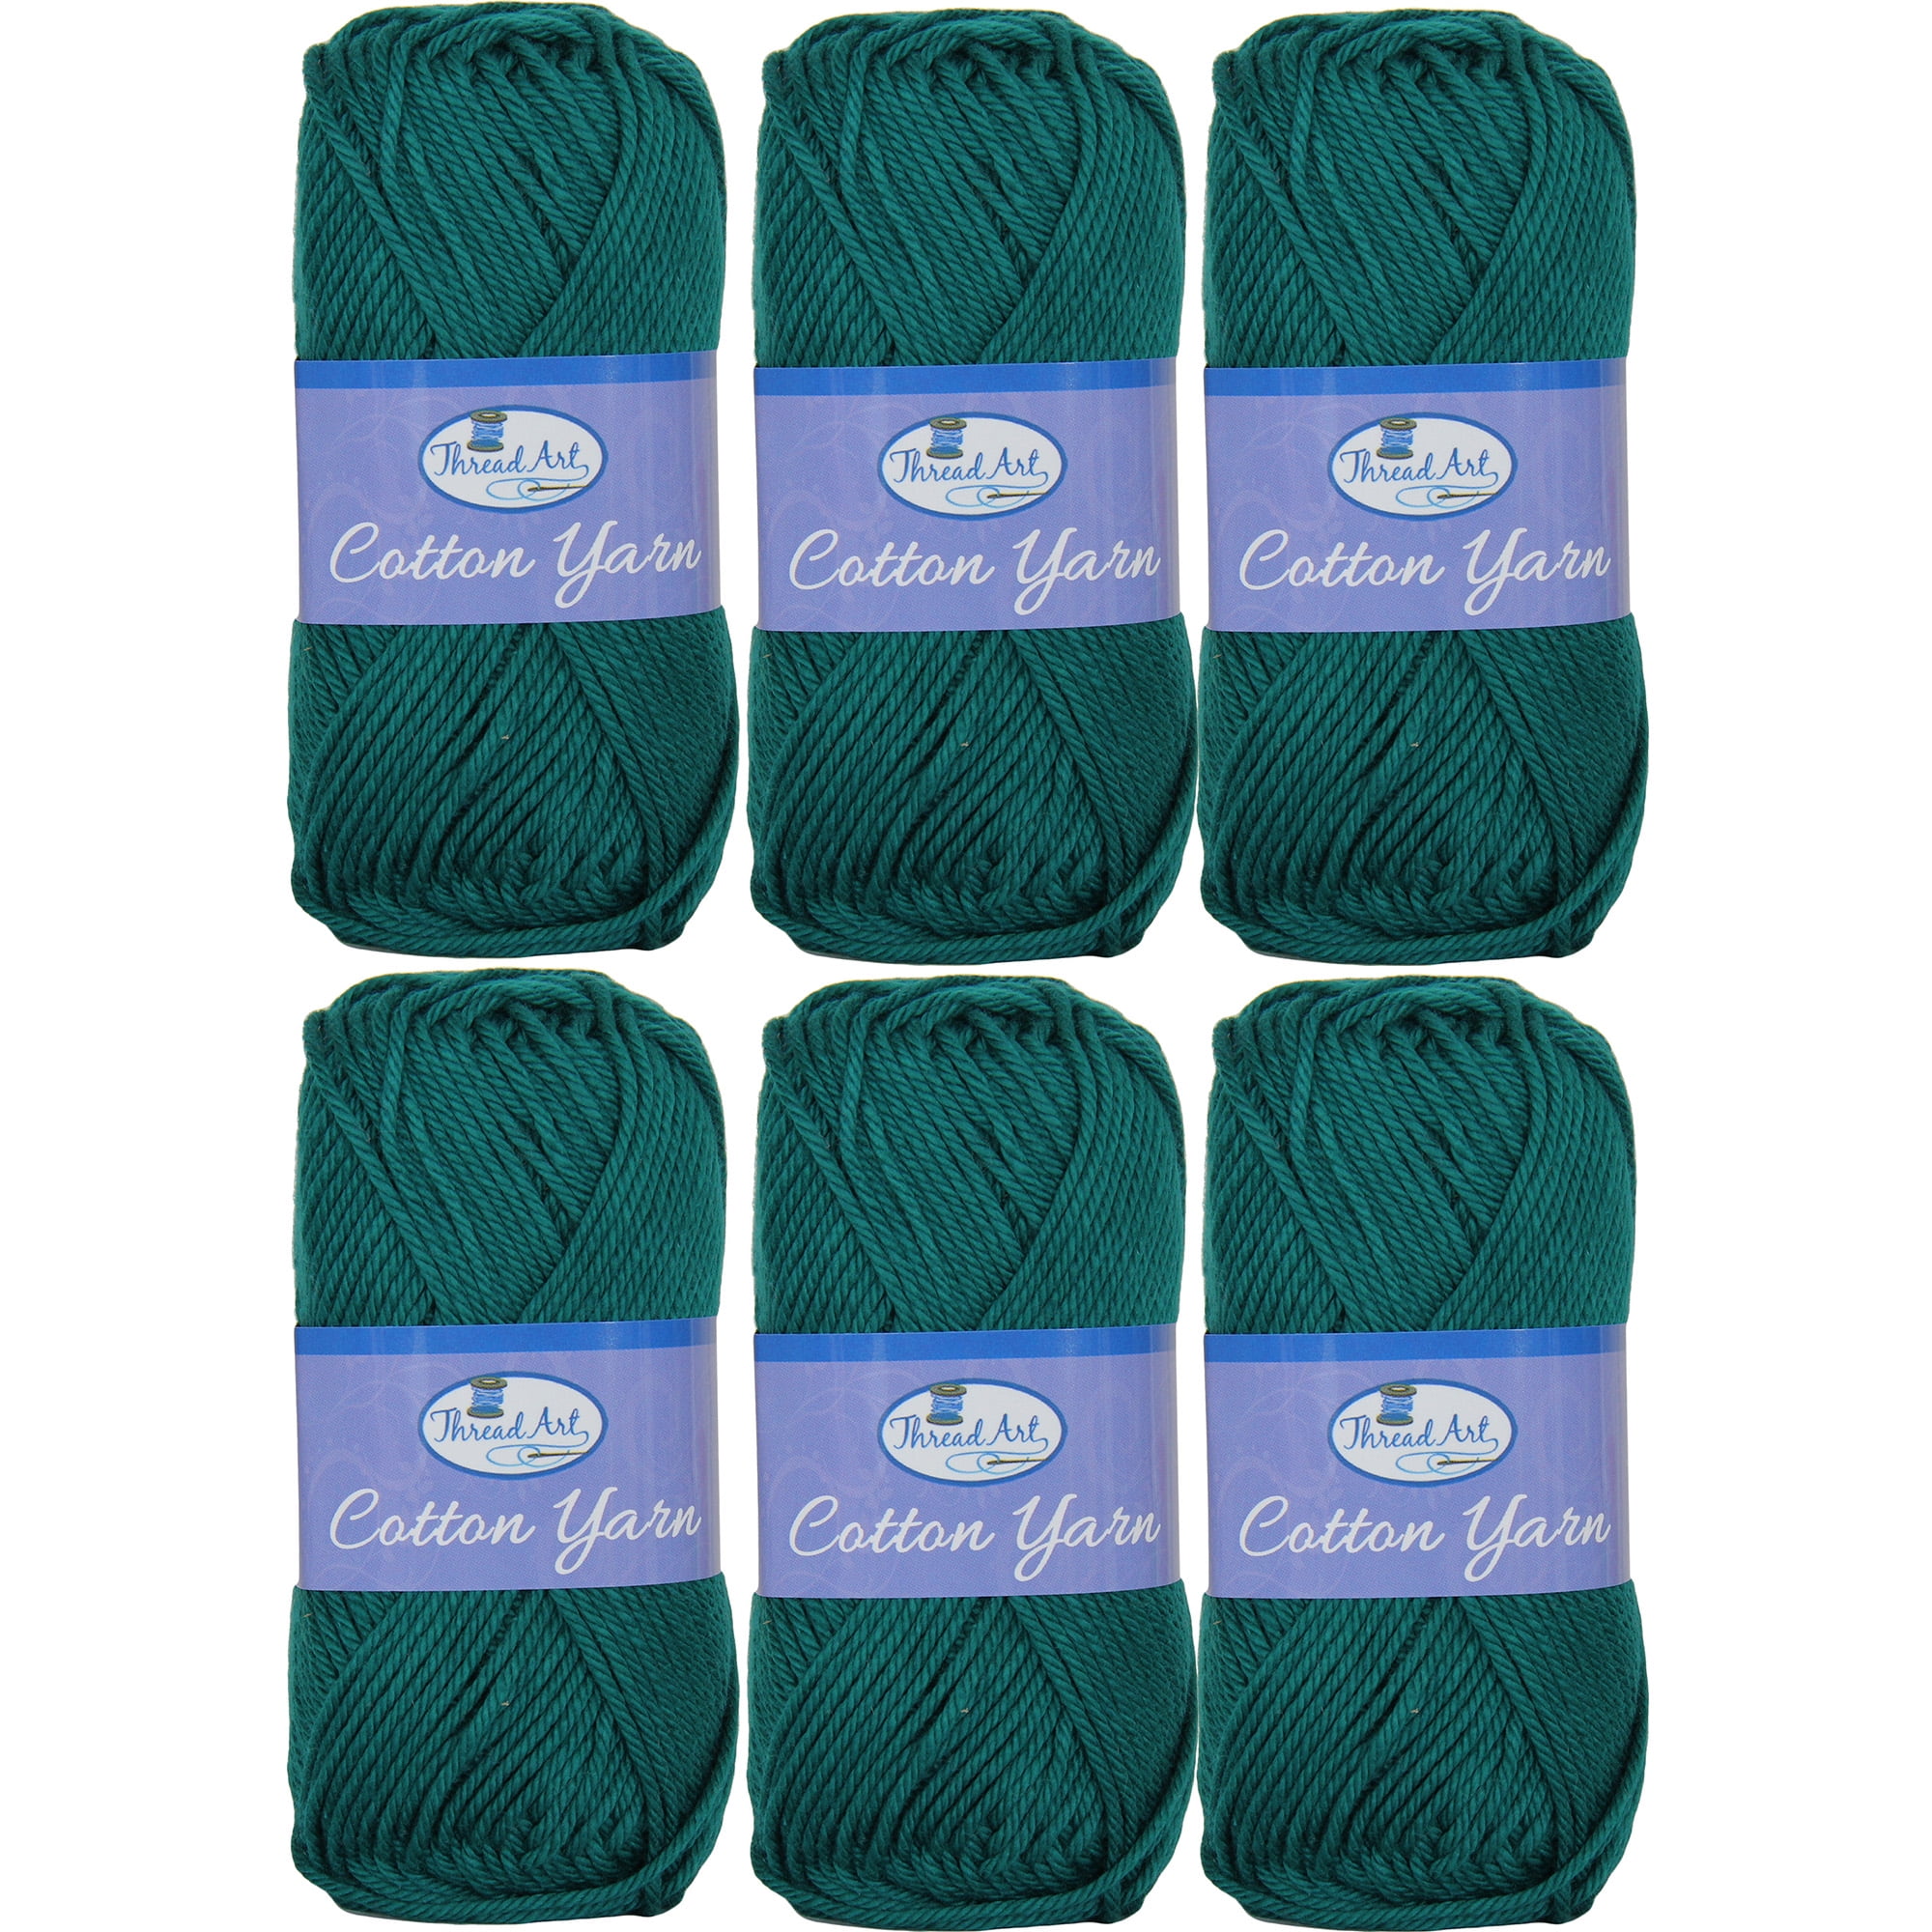 Emerald green color 100% mercerised cotton yarn - for making small projects  like crocheting toy amigurumi – Yarn Home